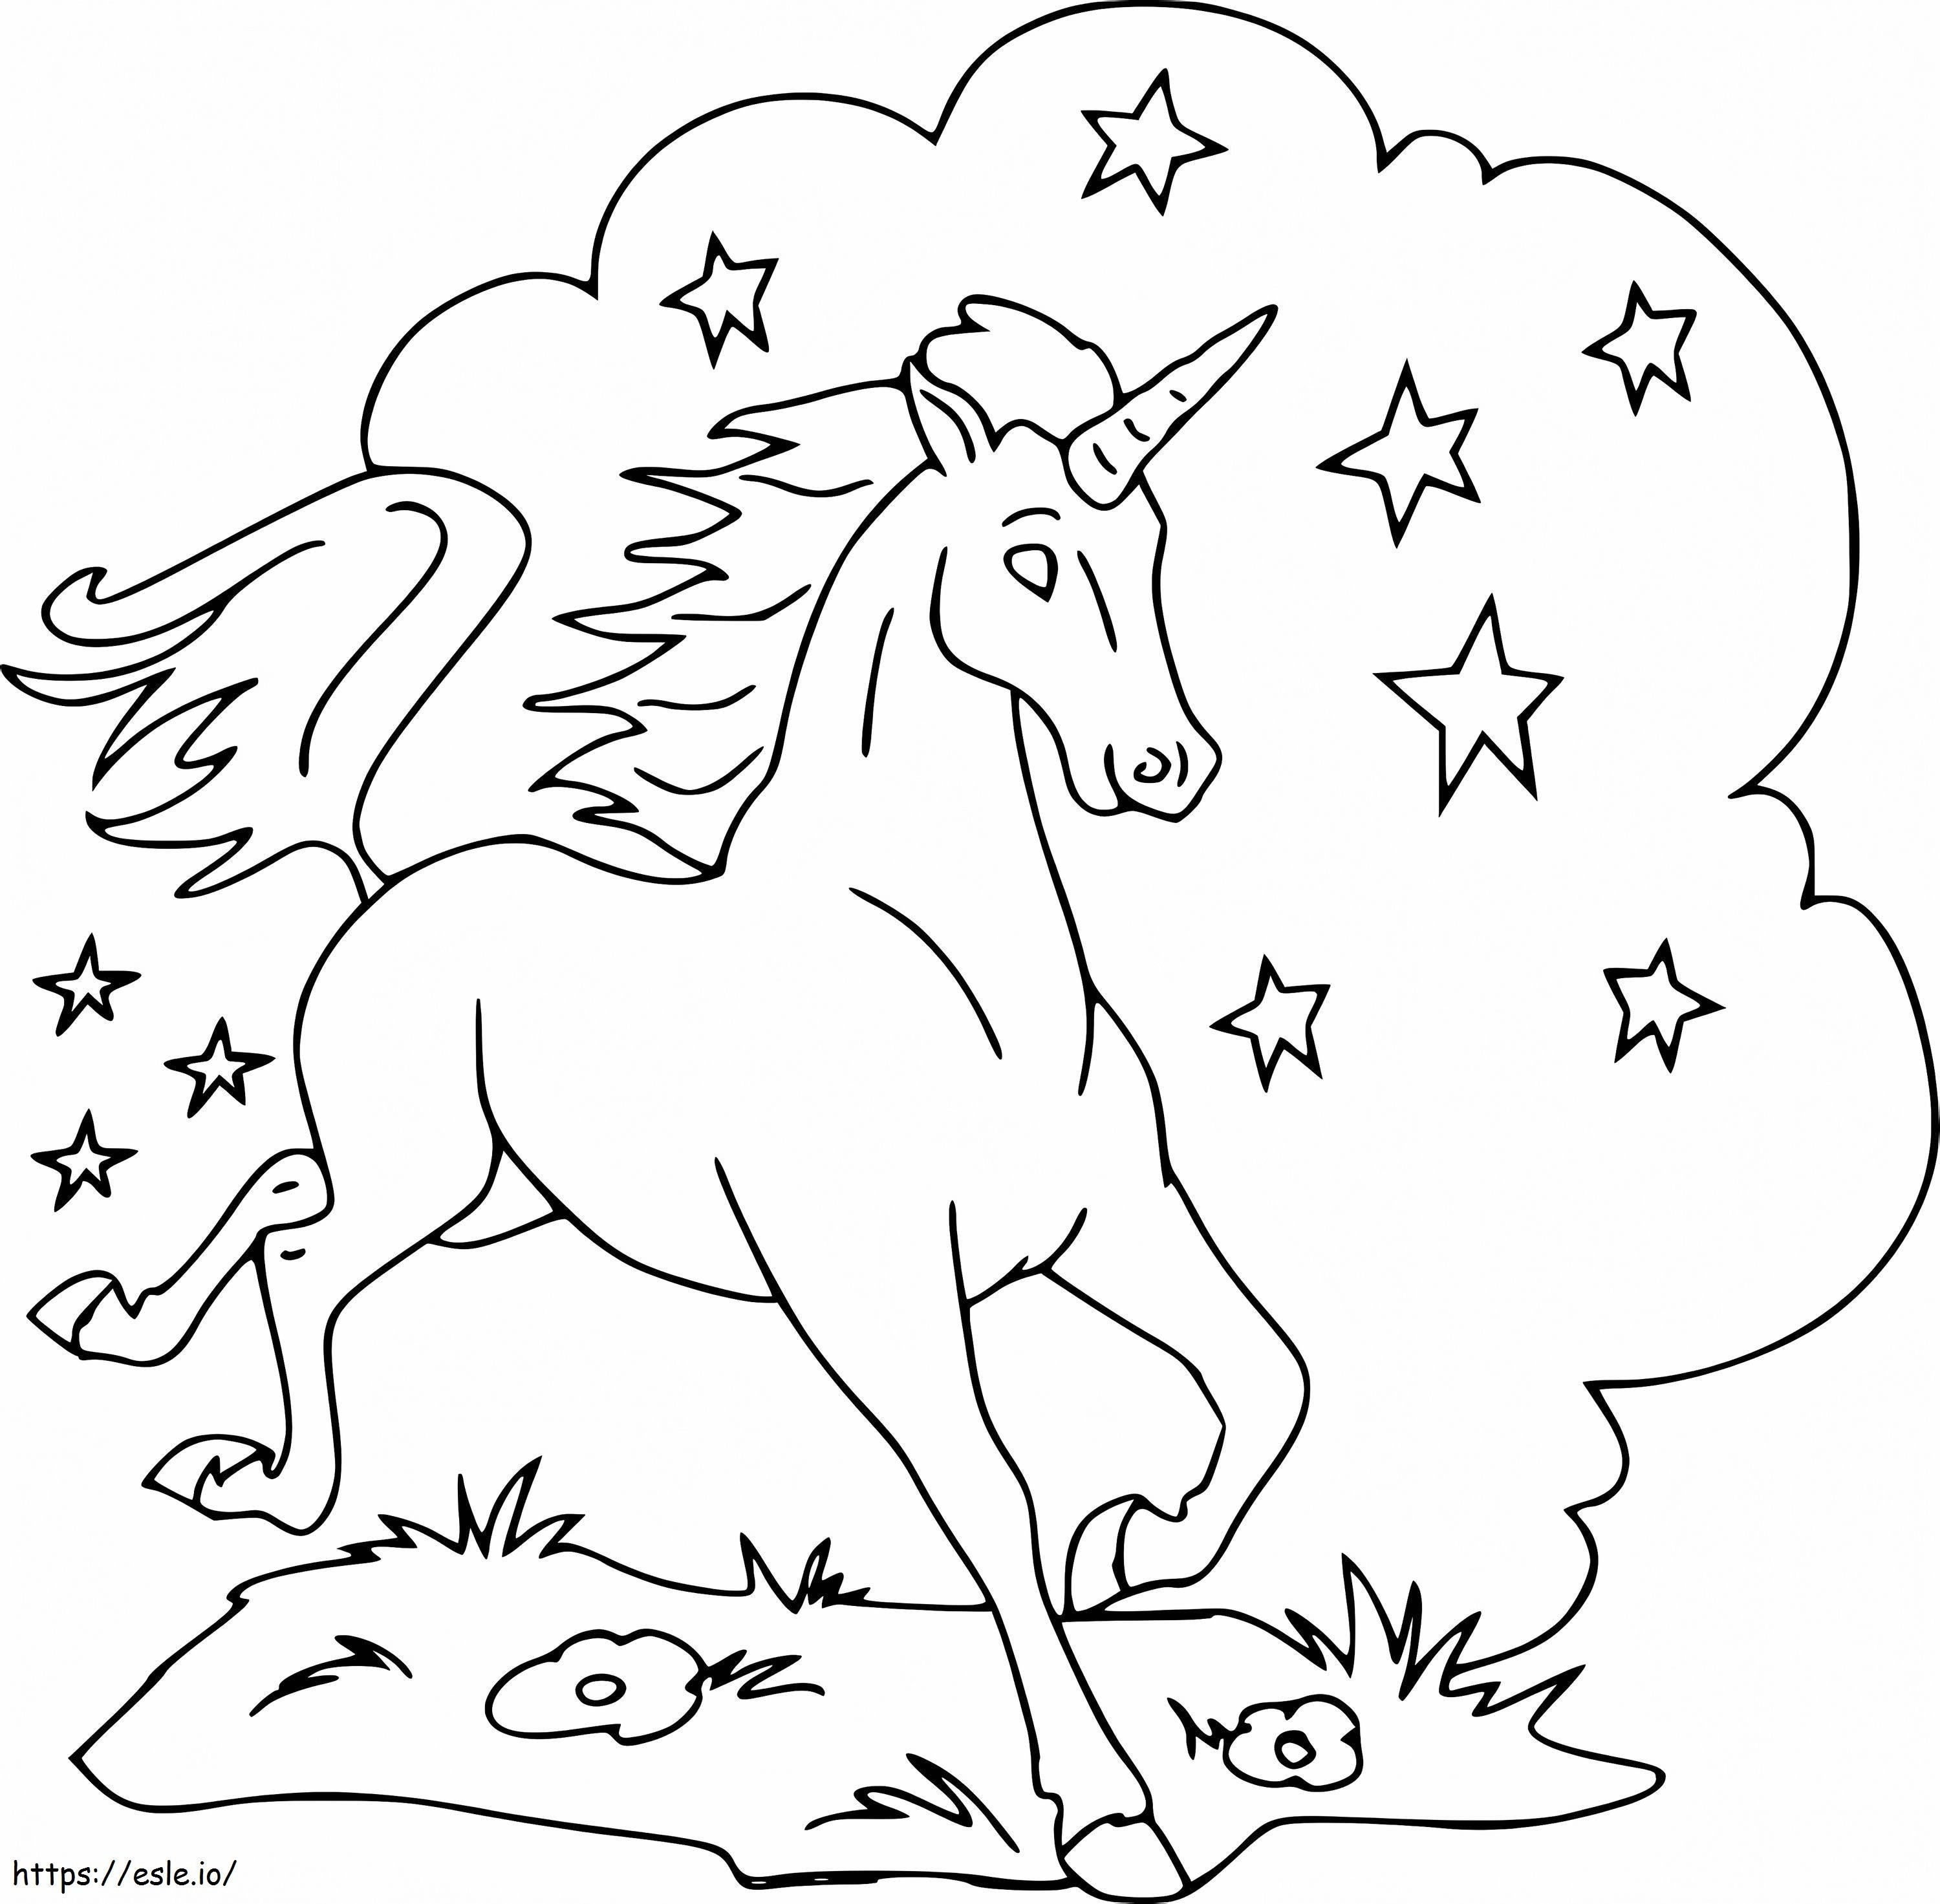 1563756494 Unicorn With Star A4 coloring page